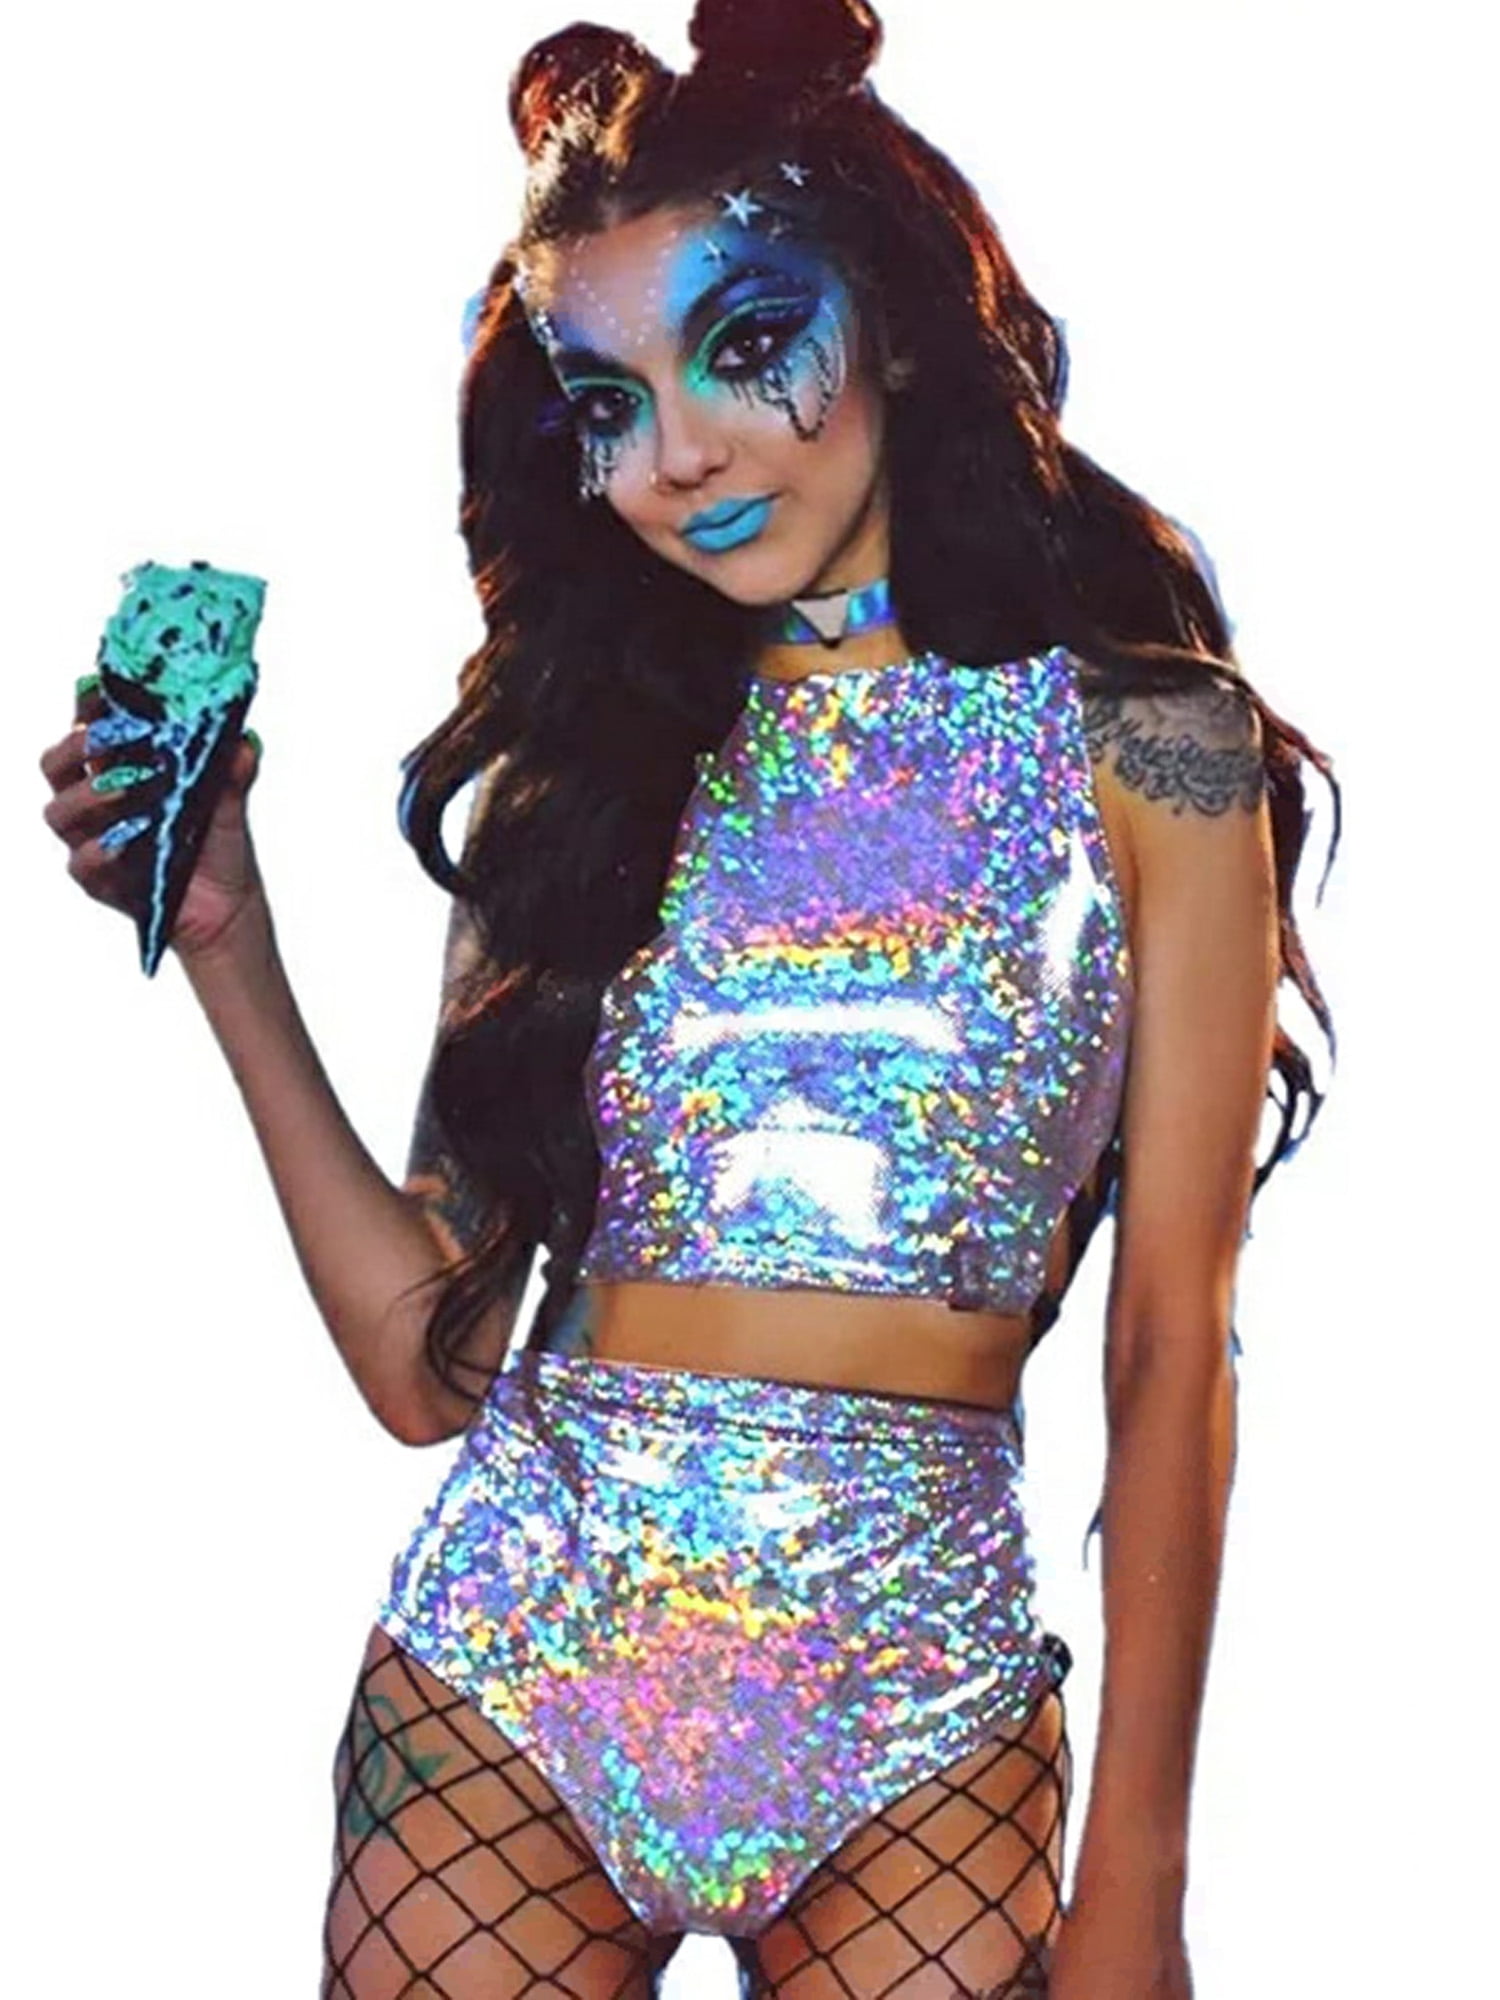 Women 2pcs Rave Outfit Holographic Hologram Metallic Bandage Crop Top Booty  Shorts Set Party Clubwear 